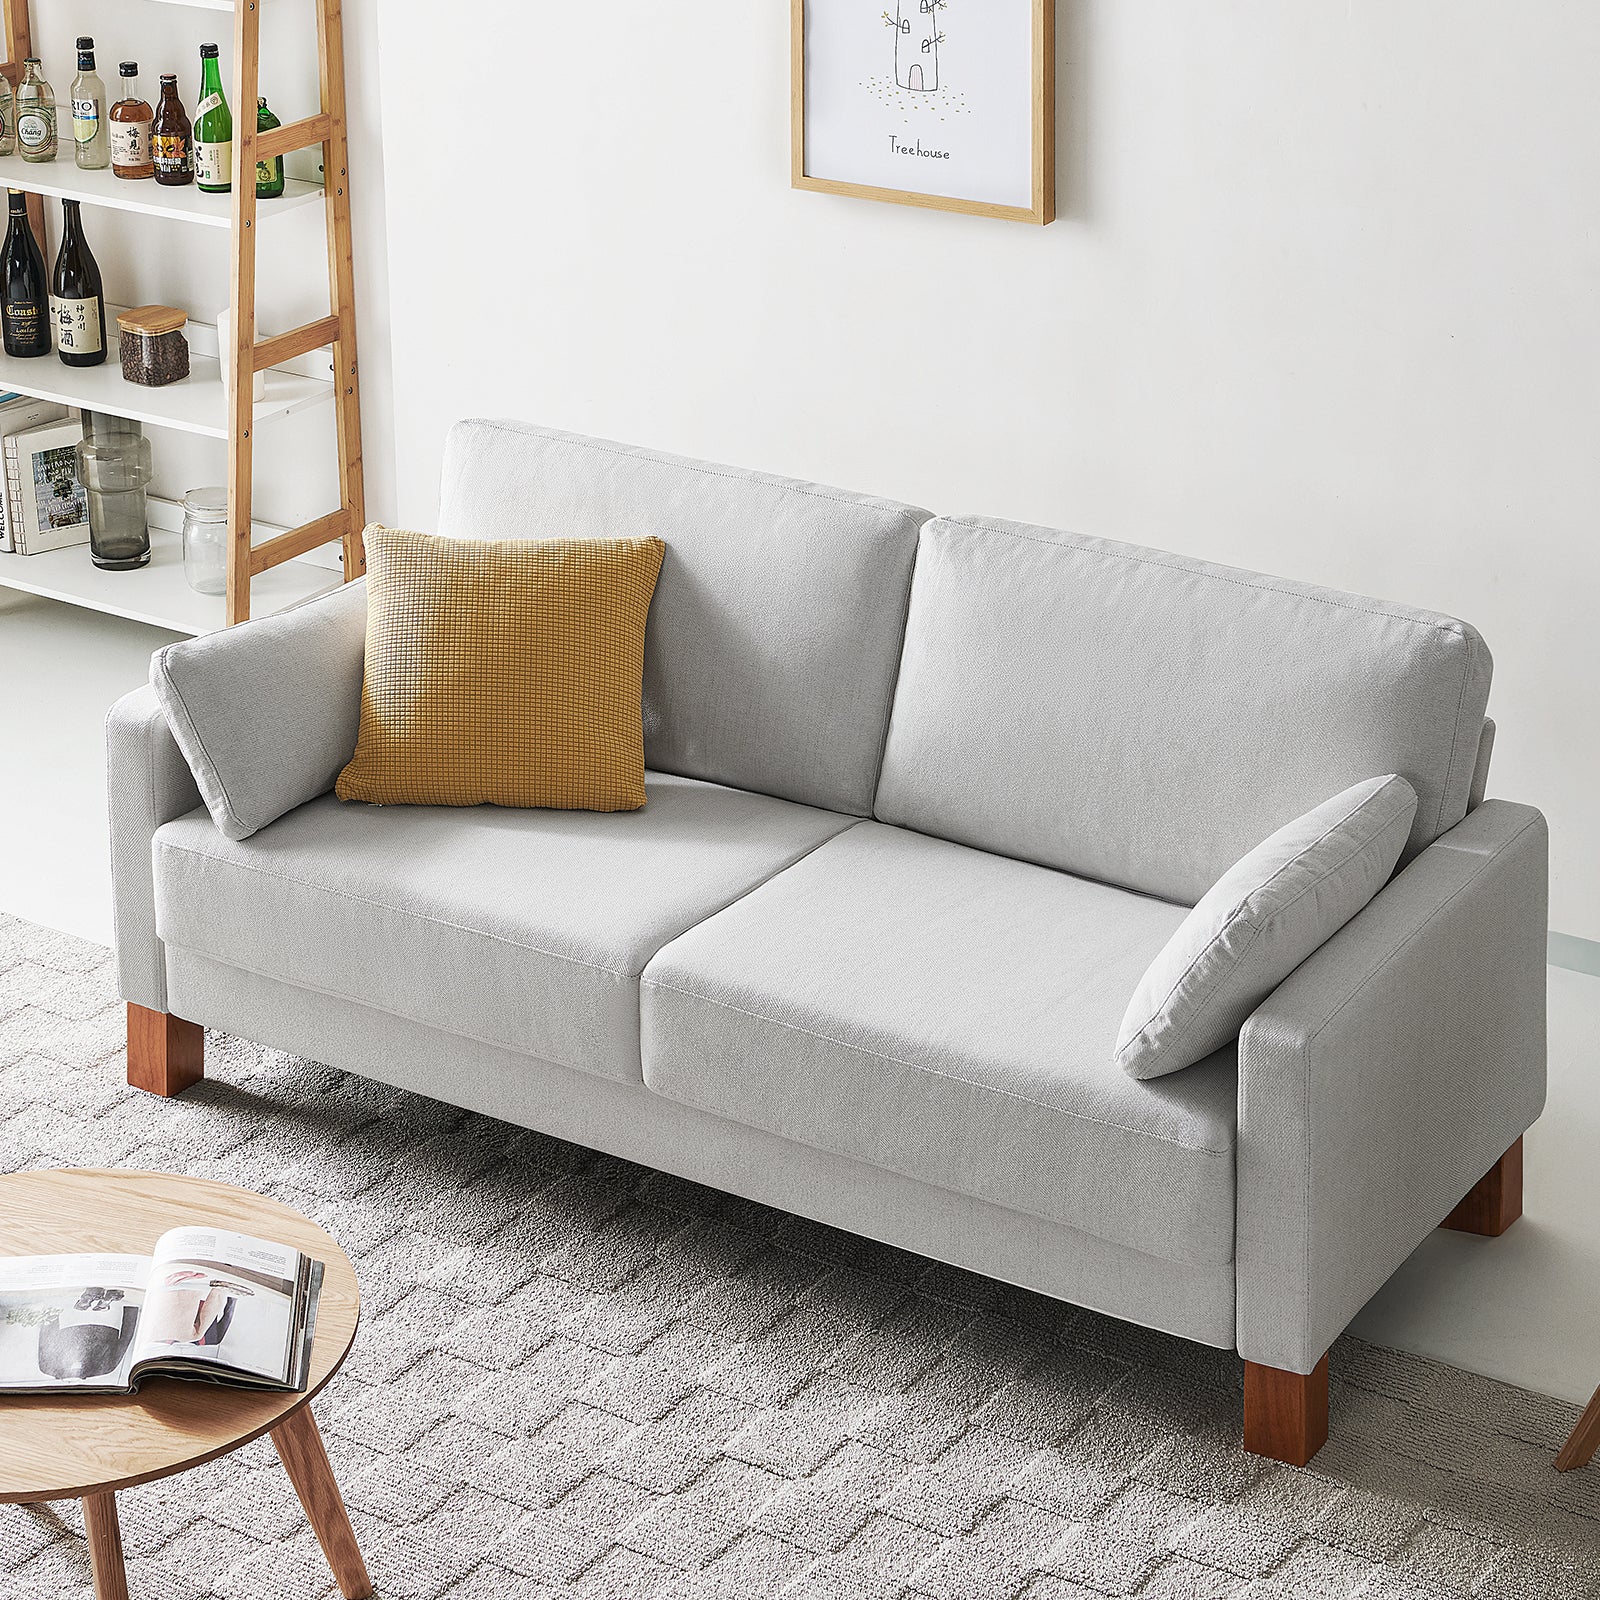 Serena Sofa, Classic Fabric Loveseat with Thick Cushion and Wooden Legs, White, 56'', 66'' or set